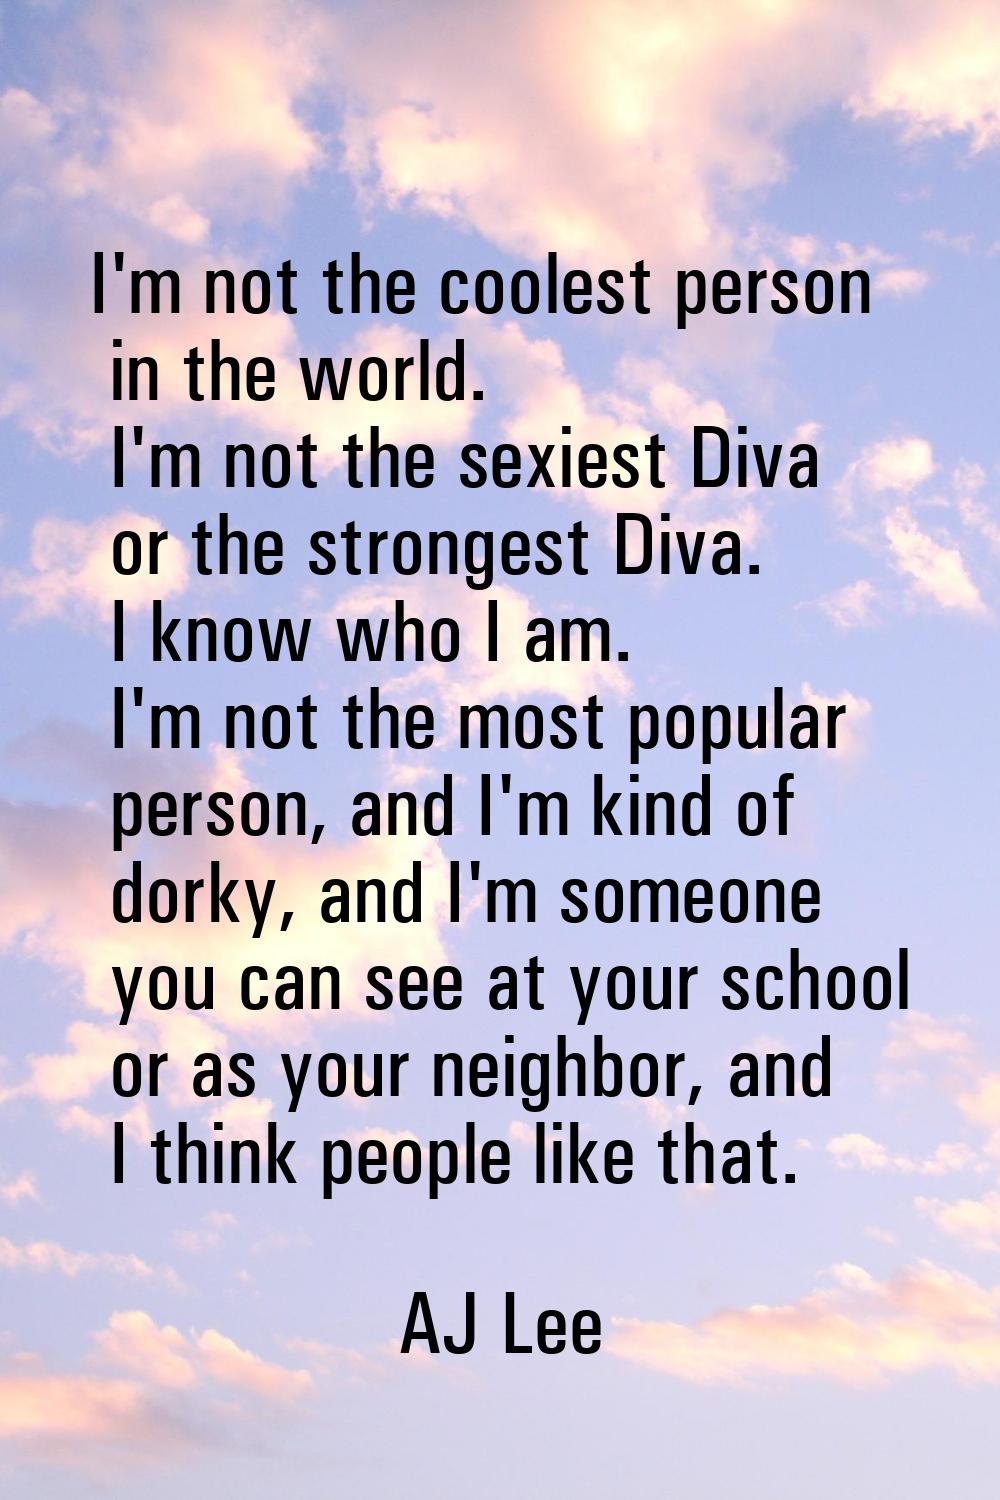 I'm not the coolest person in the world. I'm not the sexiest Diva or the strongest Diva. I know who